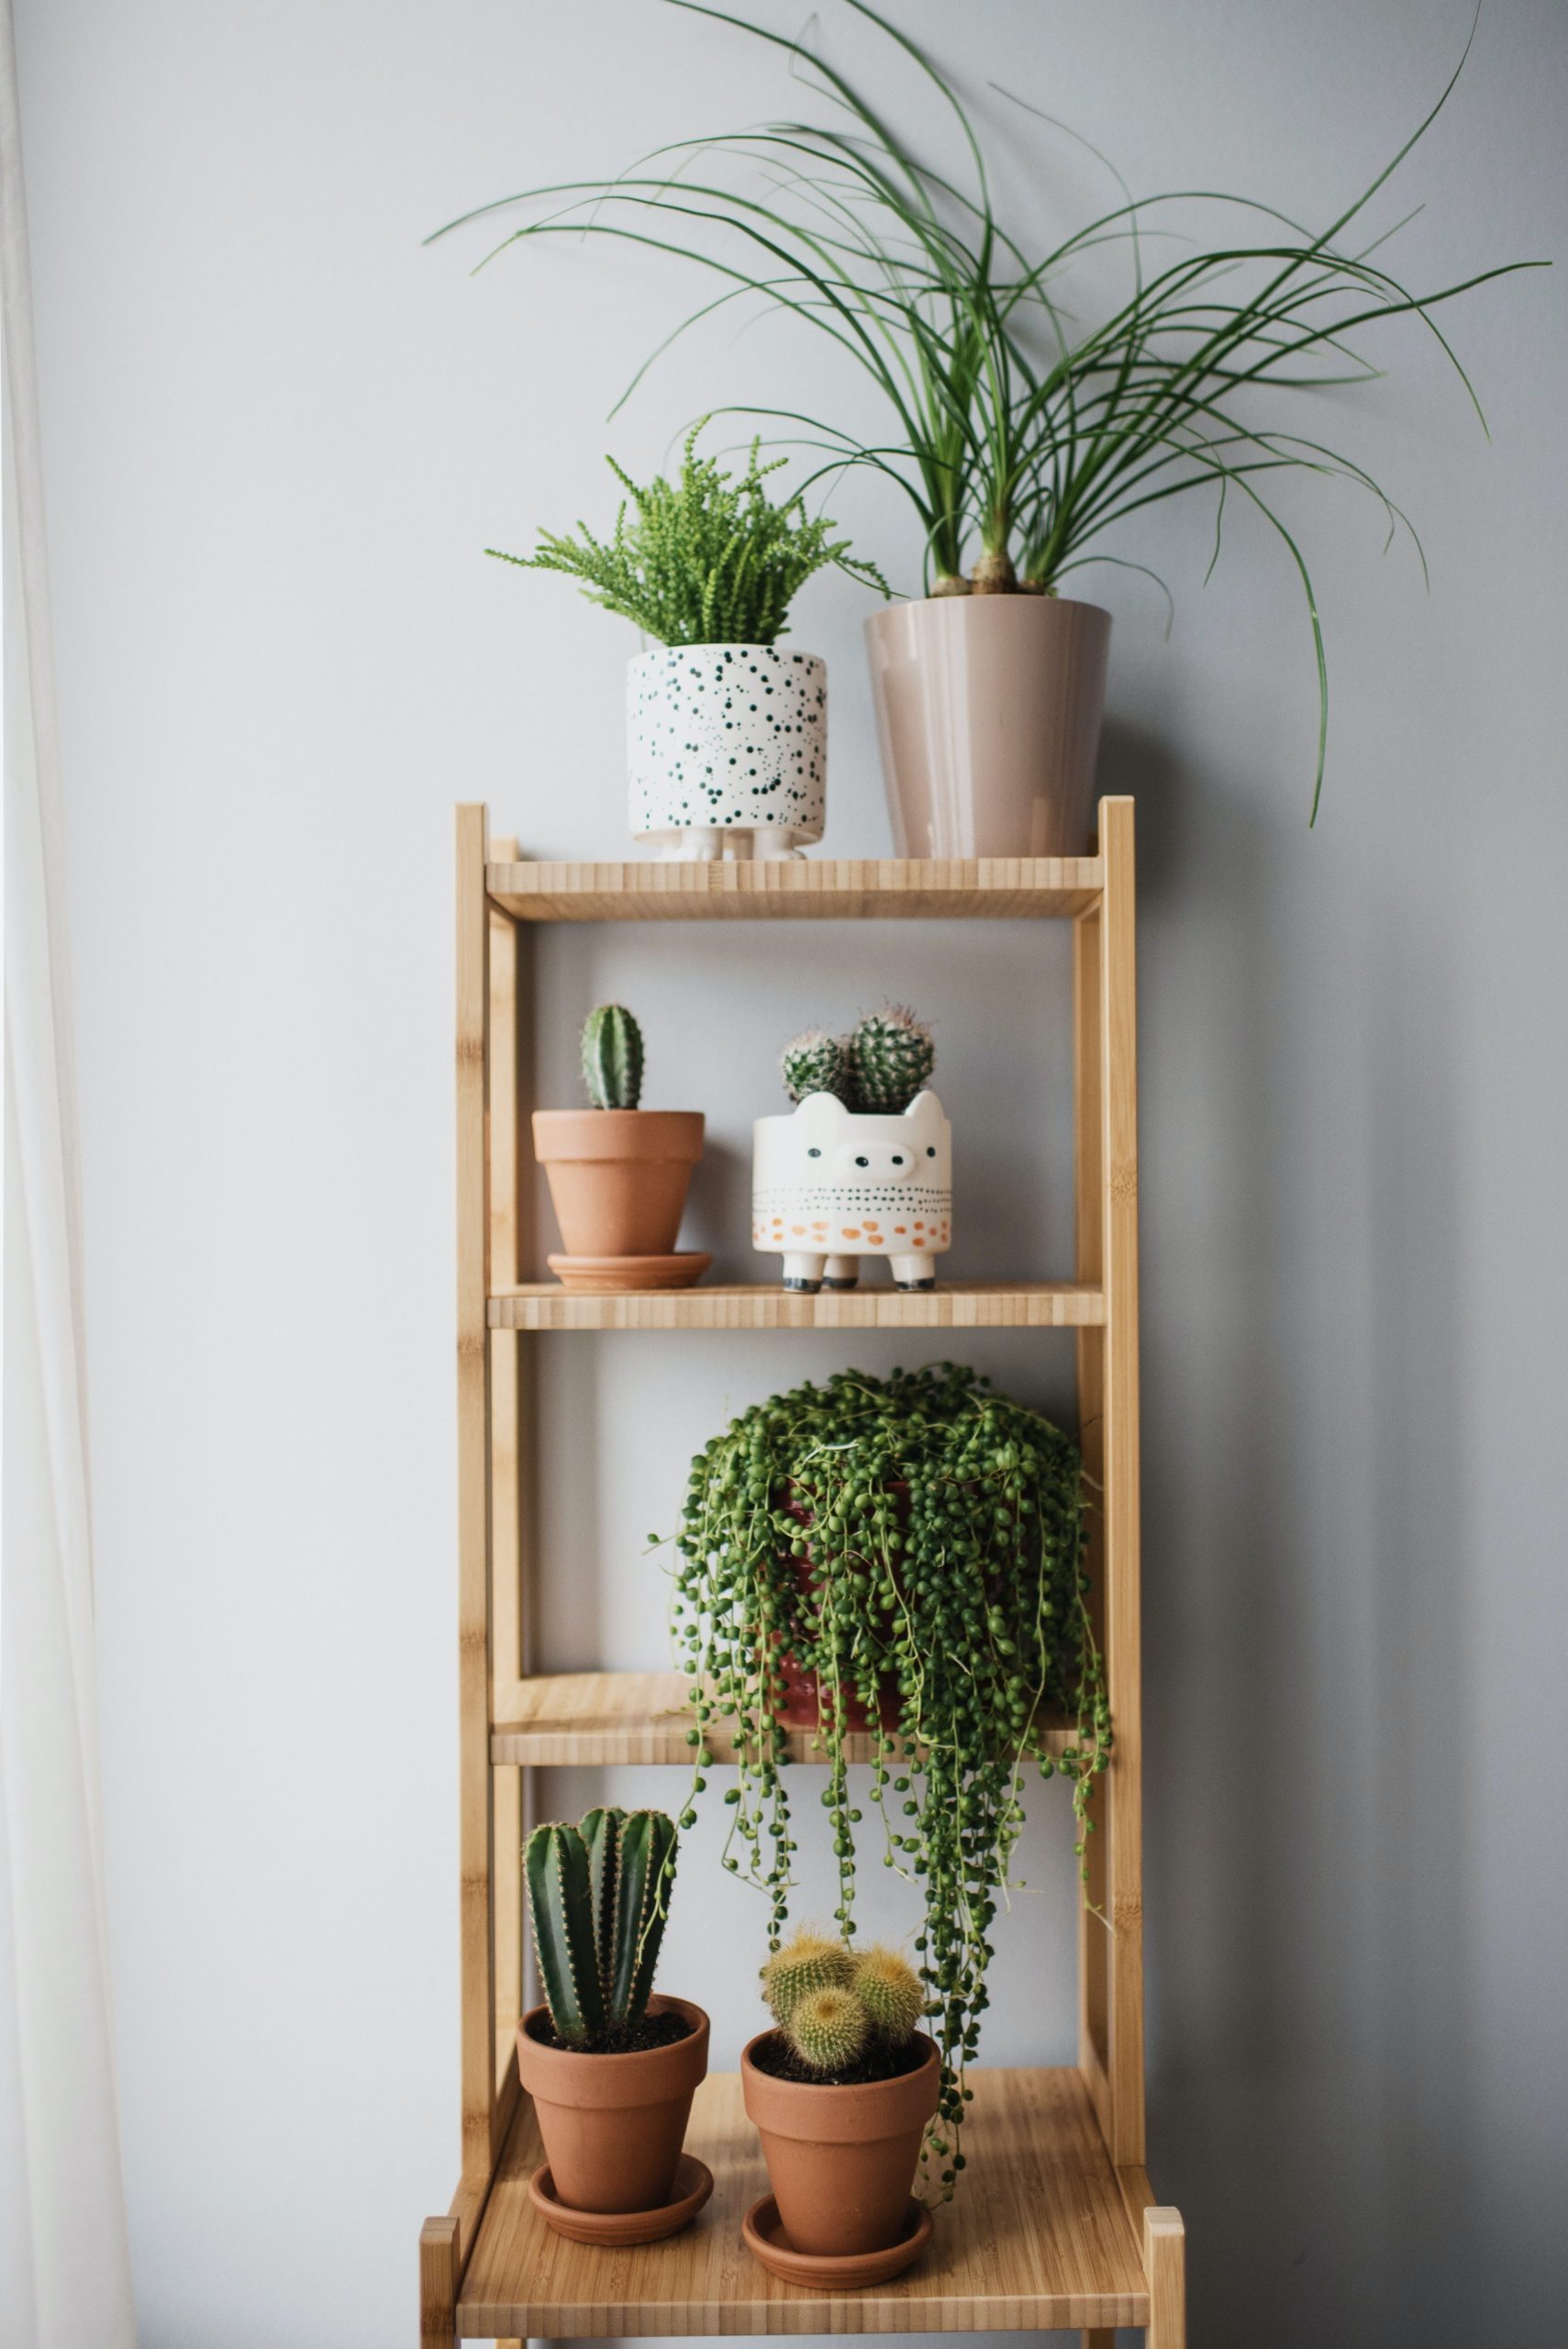 Can You Decorate A Rented House - House Plants